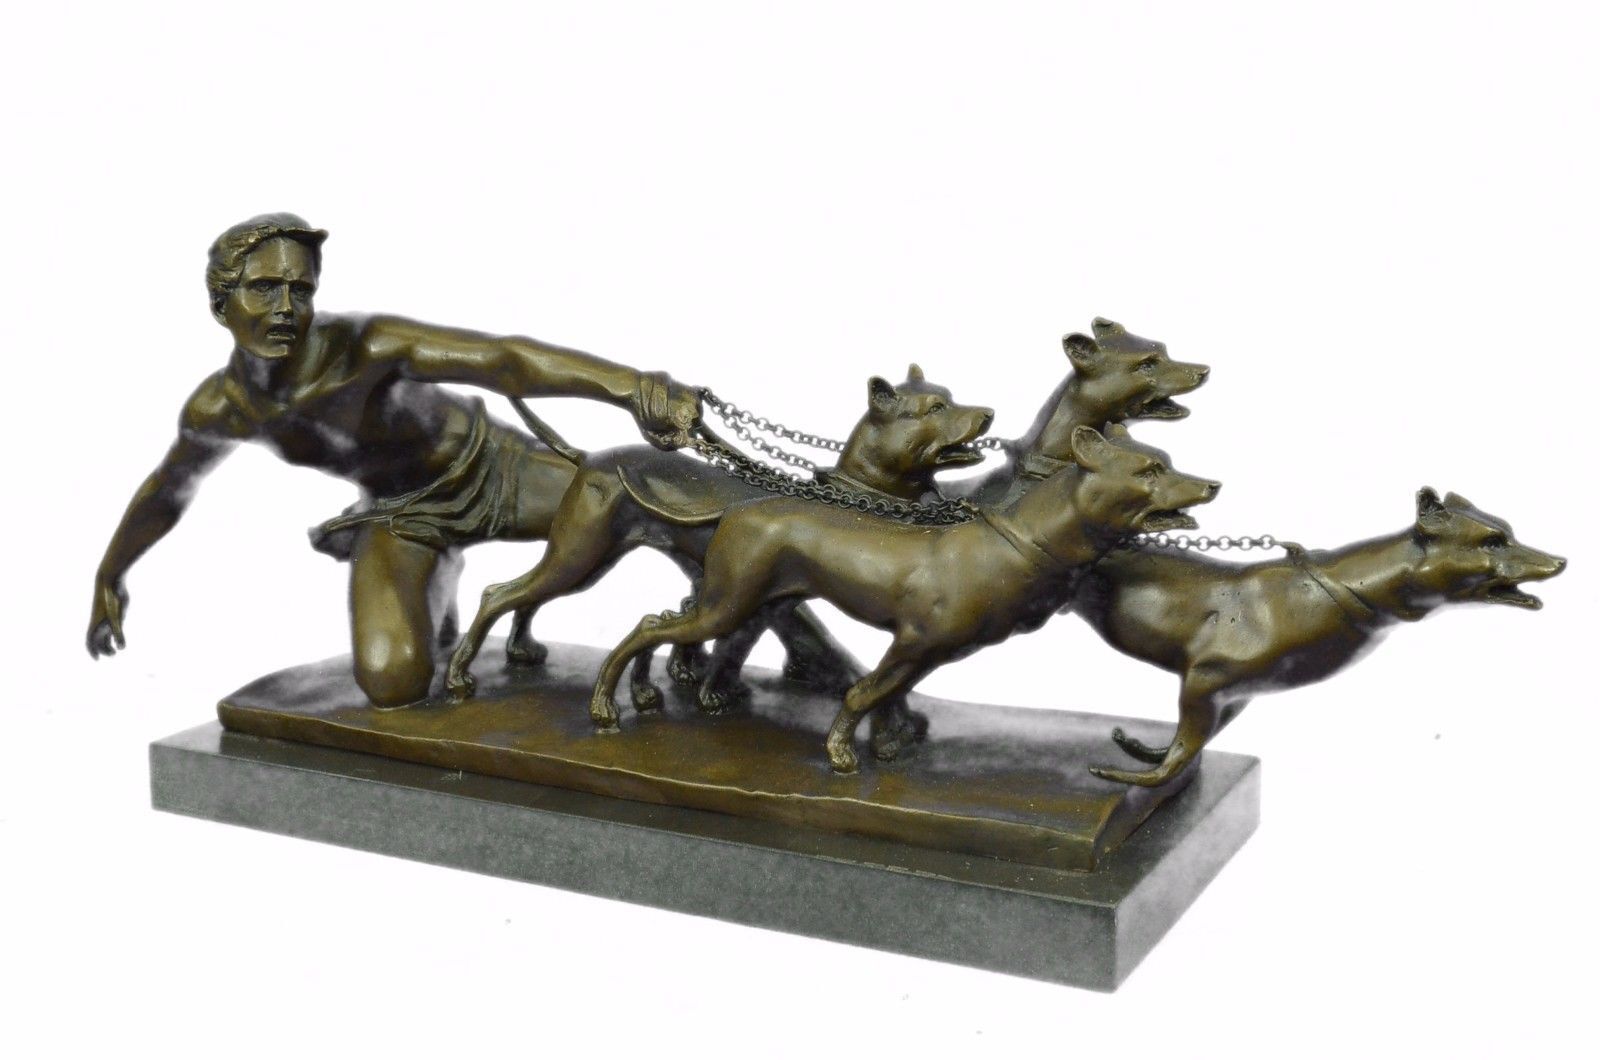 Handcrafted Man Pulling 3 Dogs Bronze Sculpture Museum Quality Artwork Hot Cast